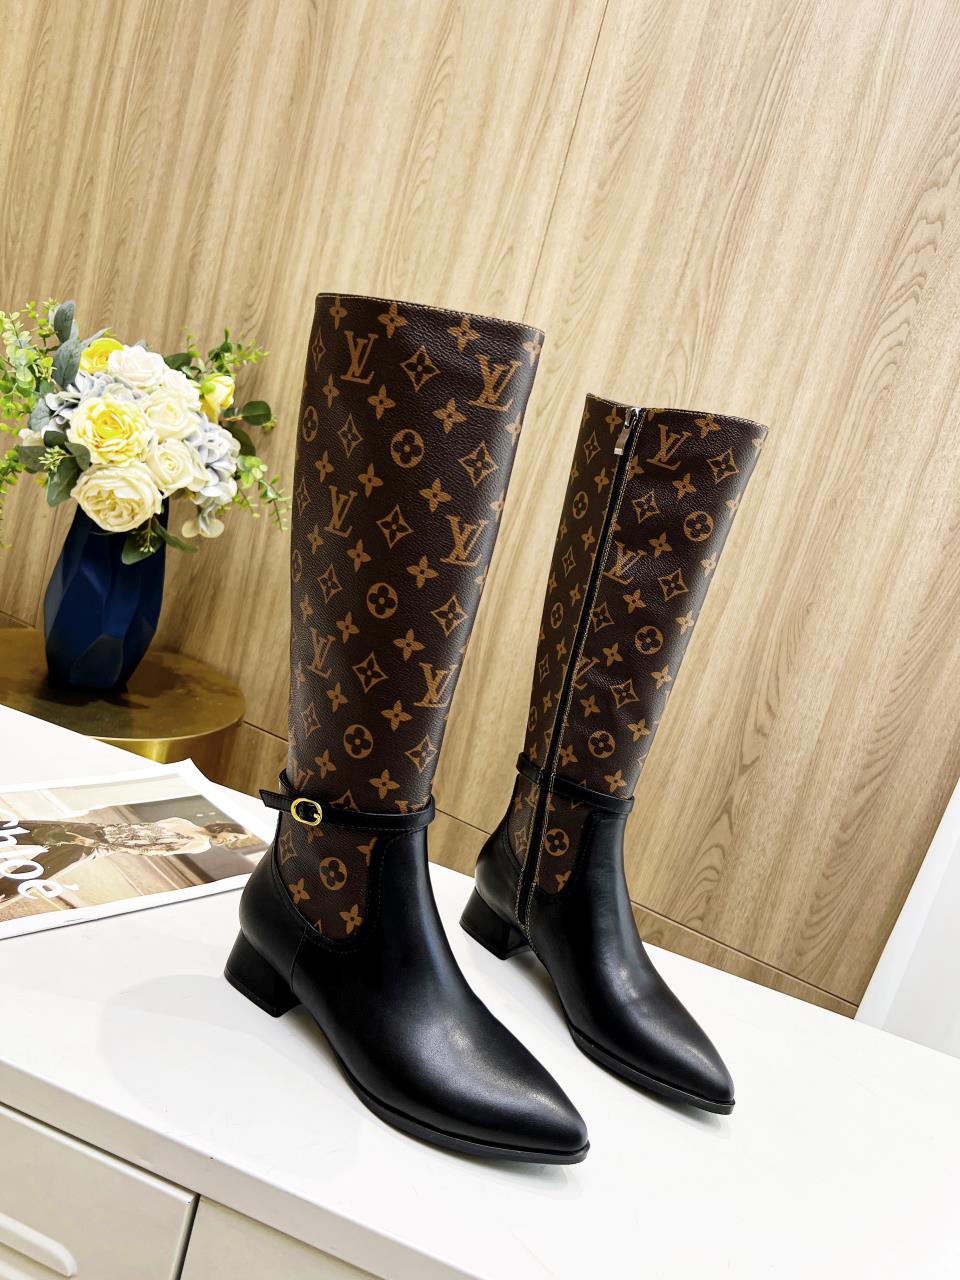 Louis Vuitton Pointed Toe Boot For Women # 262827, cheap Louis Vuitton Boots, only $115!